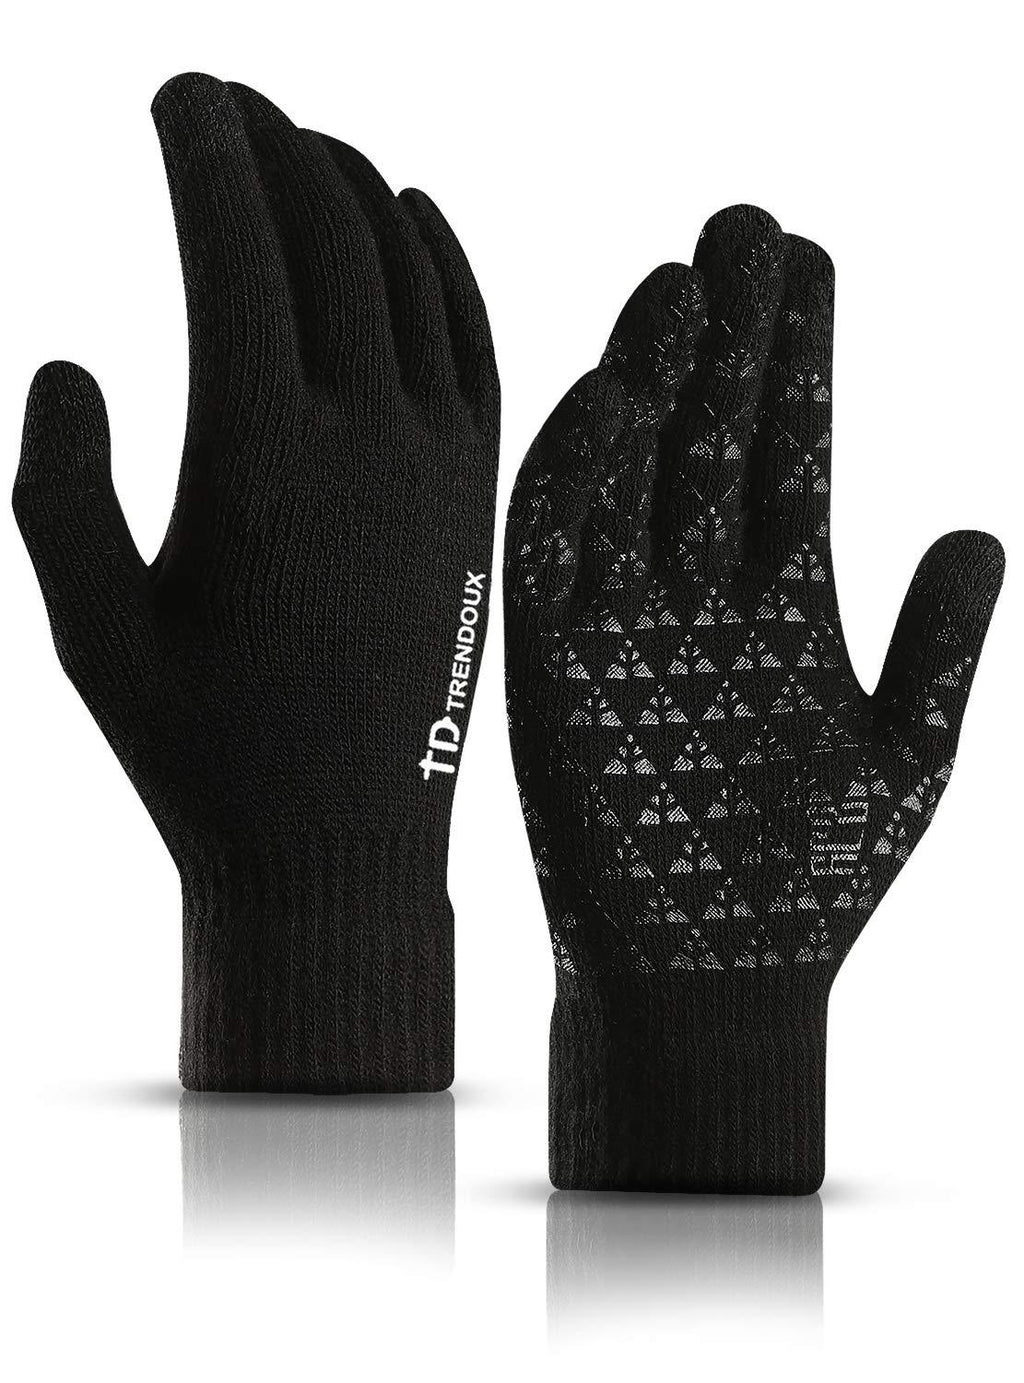 [Australia] - TRENDOUX Winter Gloves for Men and Women - Upgraded Touch Screen Anti-Slip Silicone Gel - Elastic Cuff - Thermal Soft Wool Lining - Knit Stretchy Material Black Medium 